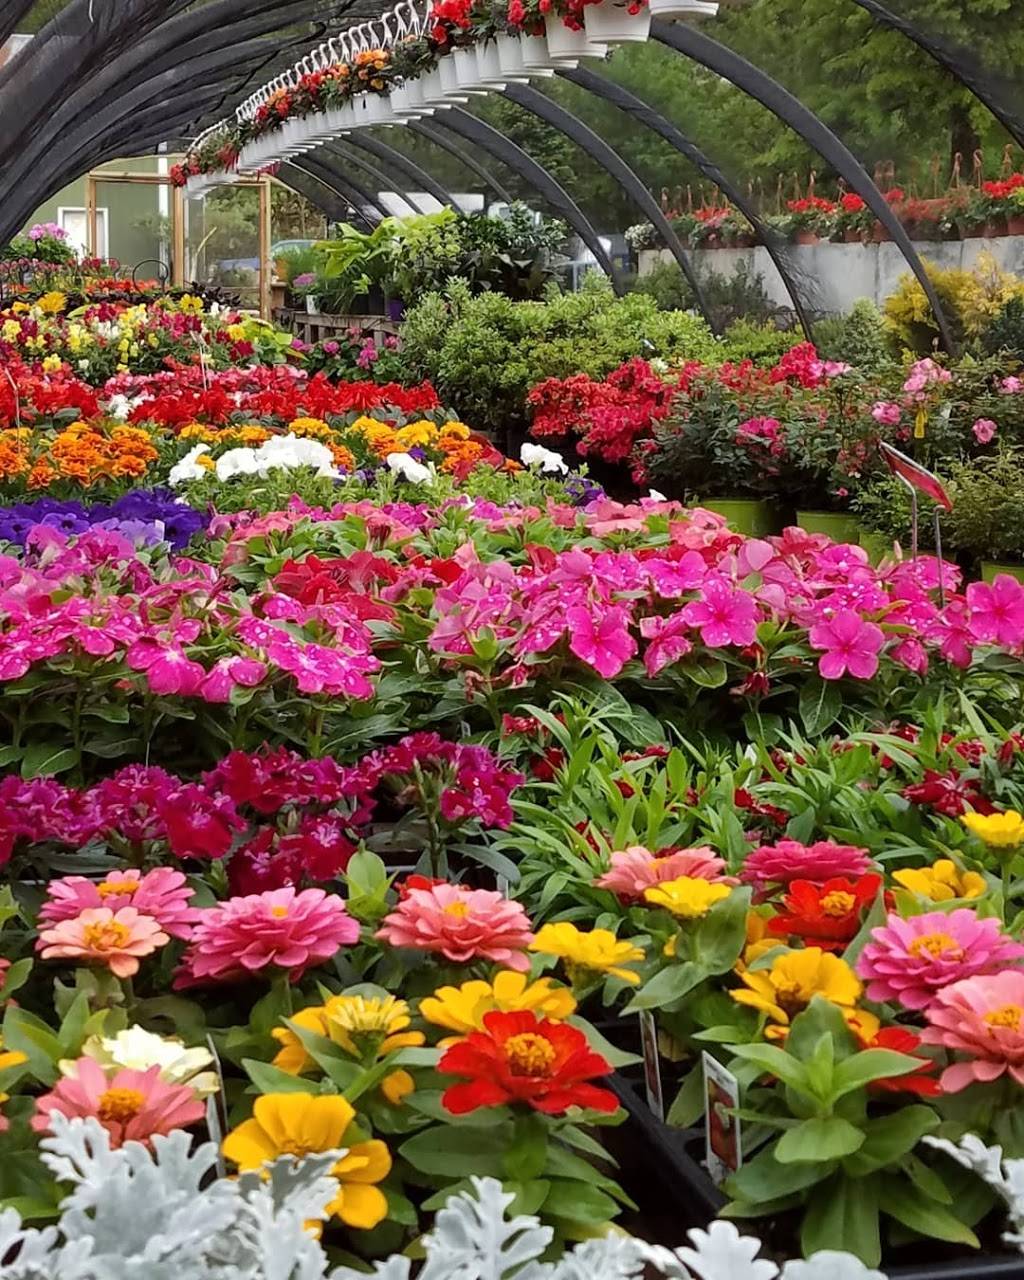 A&N Garden and Greenhouse | 2130 Reis Run Rd, Pittsburgh, PA 15237, USA | Phone: (412) 931-9230 ext. 2